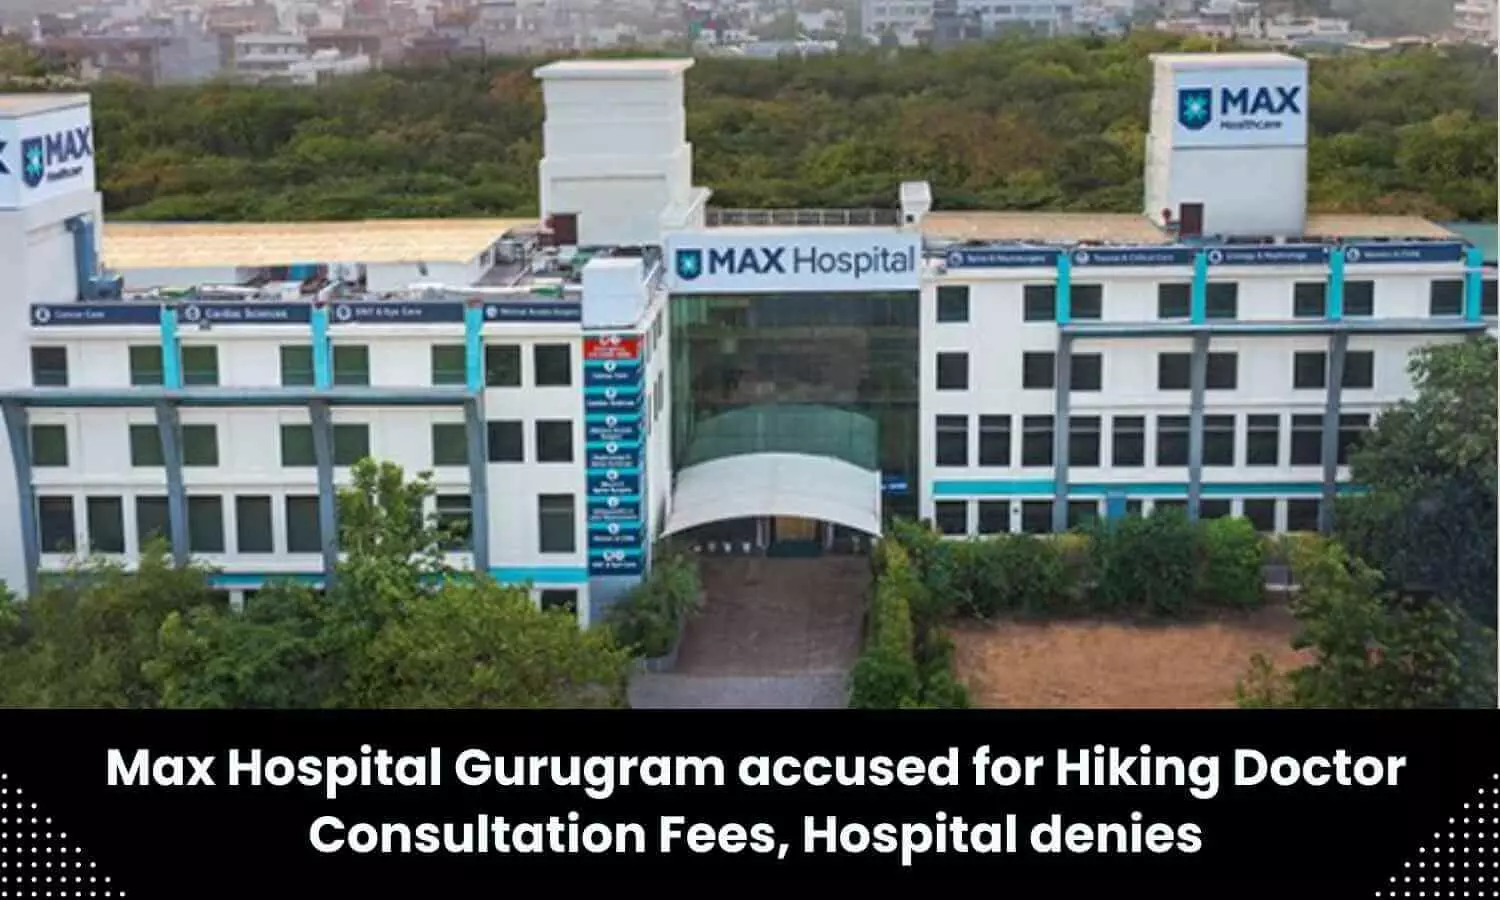 Gurugram-based Max Hospital accused of hiking doctors consultation fees, withdrawing senior citizens waiver